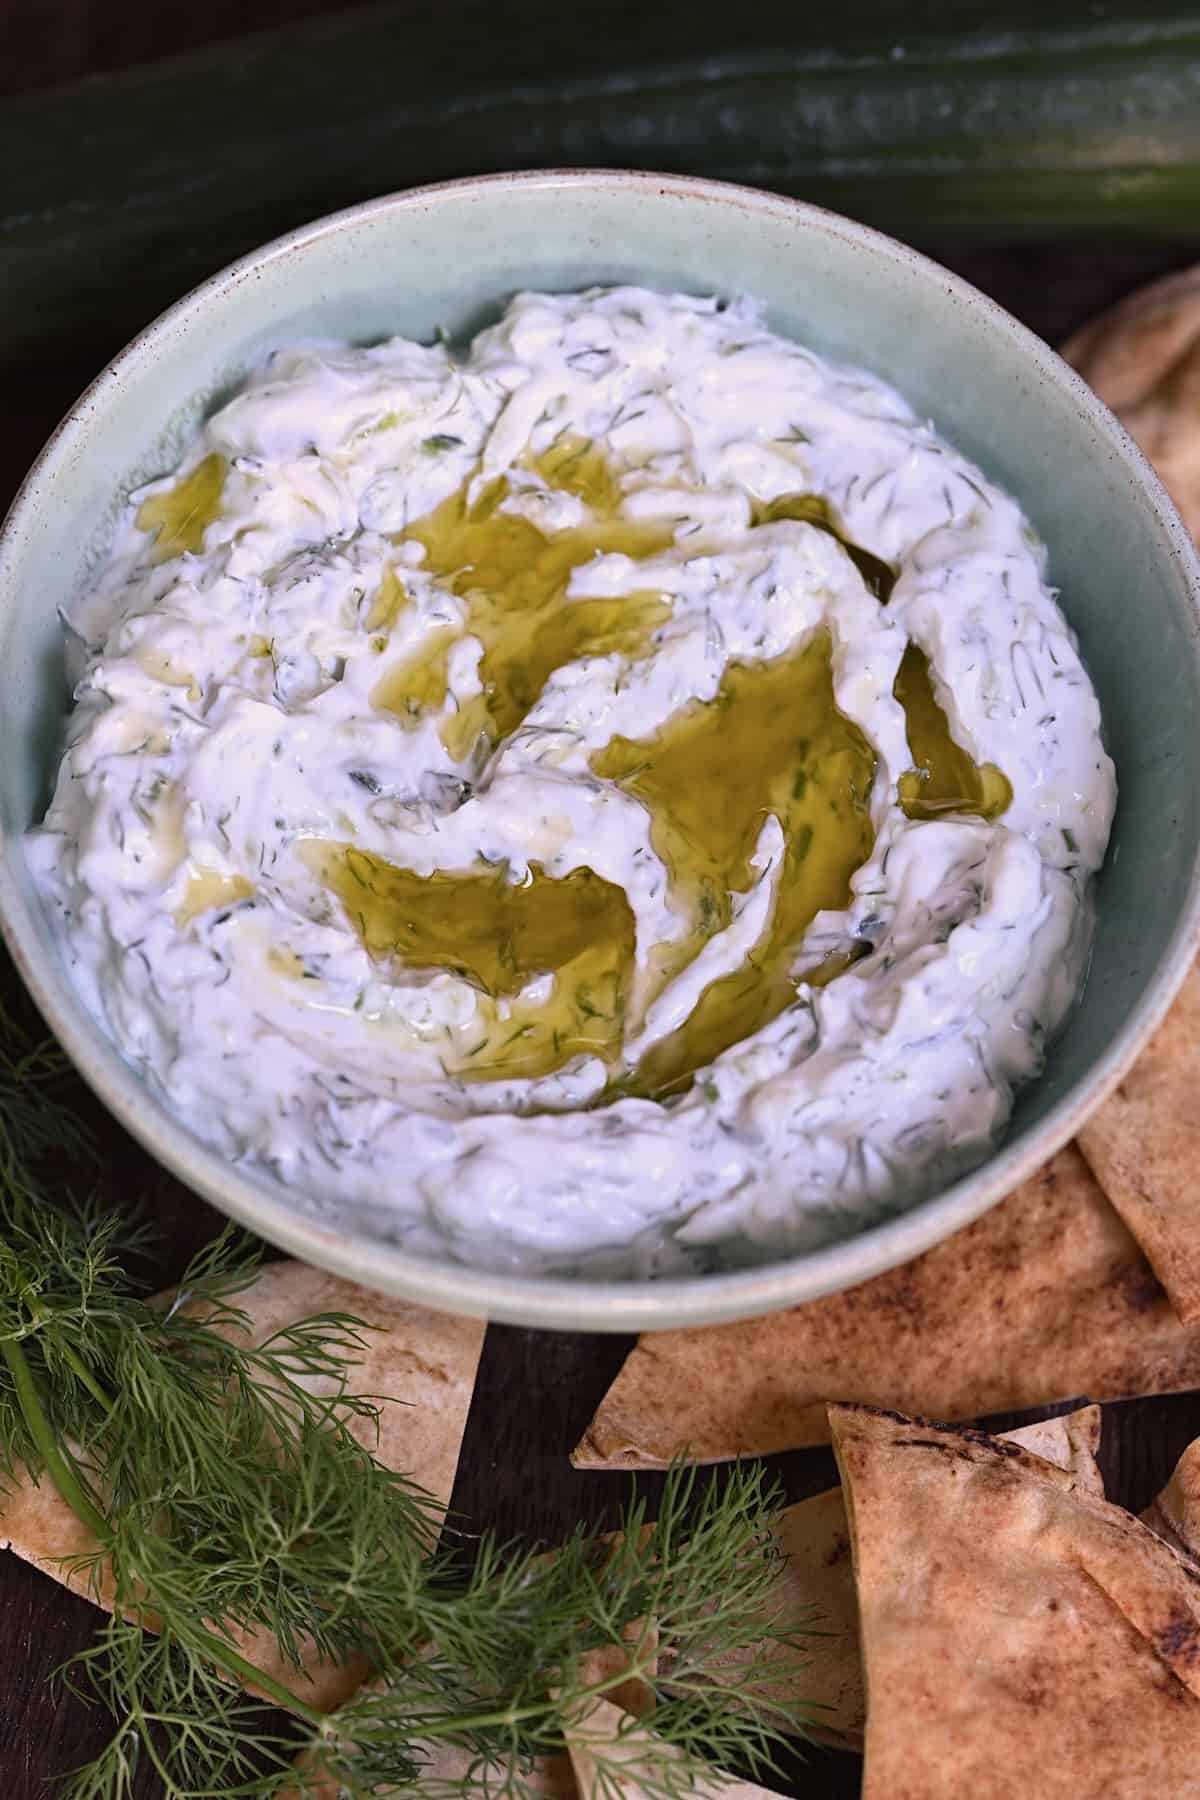 A bowl of homemade tzatziki topped with a bit of oil